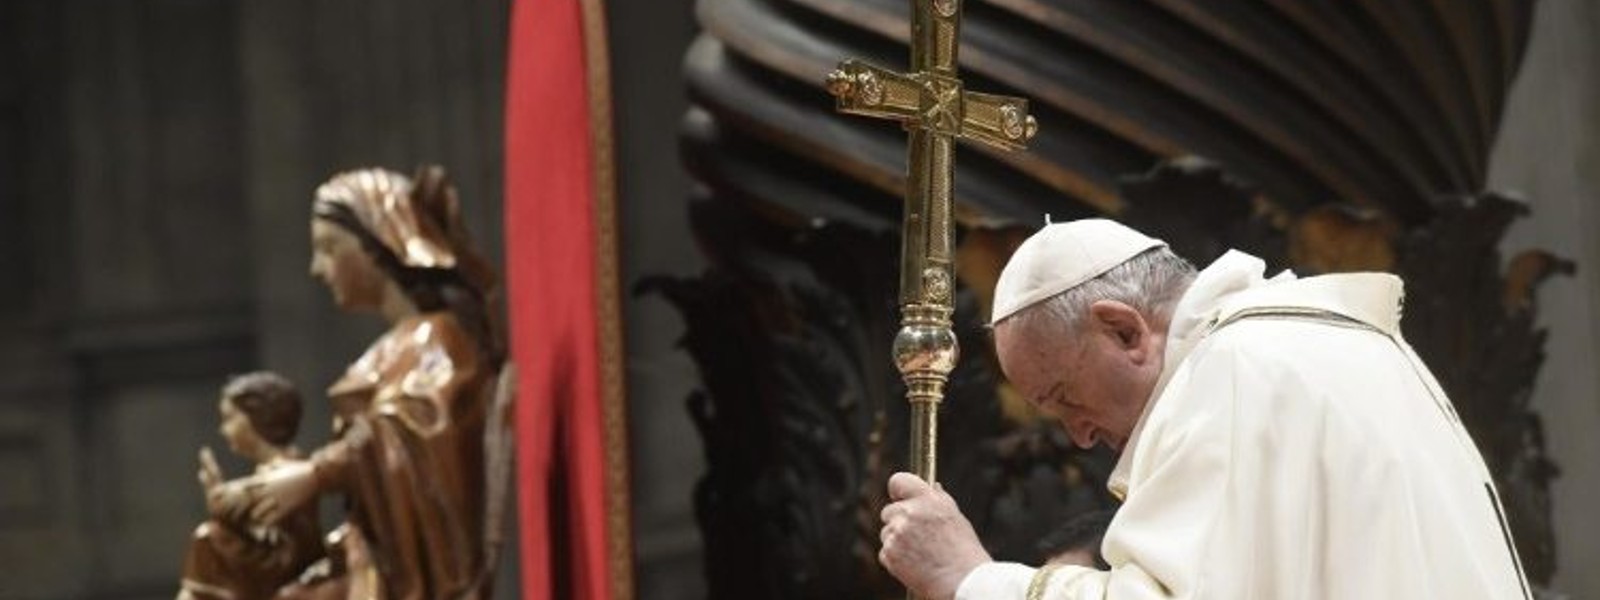 Pope Francis encourages people to ‘return to origins’ on Christmas eve